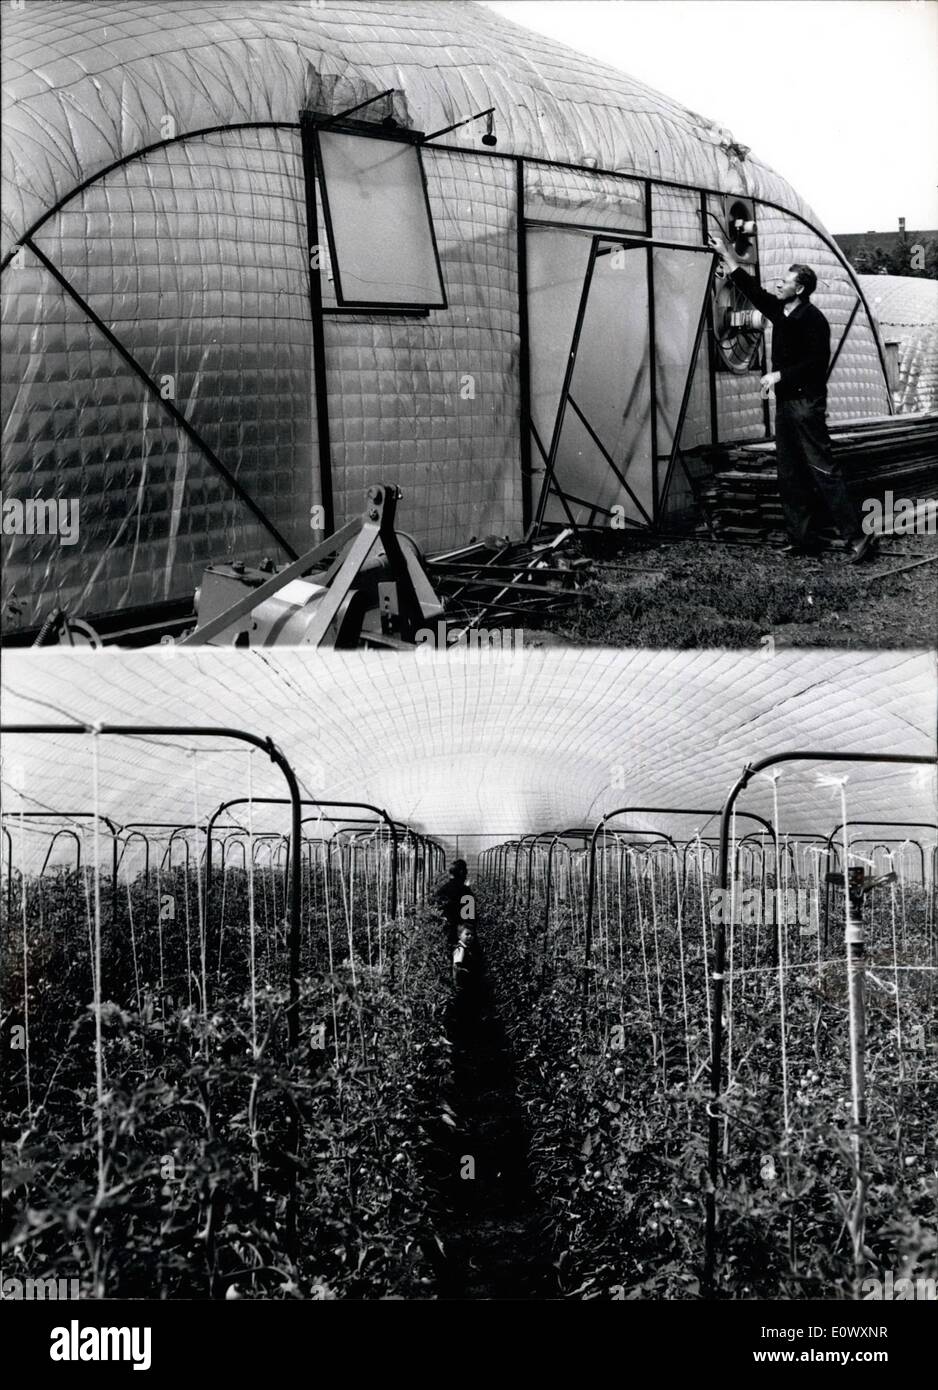 Jun. 06, 1964 - Blimp green houses: have been set up by Helmet Hausmann (Hekmut Hausmann), gardener in Stuttgart. He got the idea of using the air filled Plastic contaires for his gardens by the building companies which in Wintertime are working under such blimps. As the sunrays can go through the plastic the tomatoes in the blimp garden growup as under free air, Stock Photo